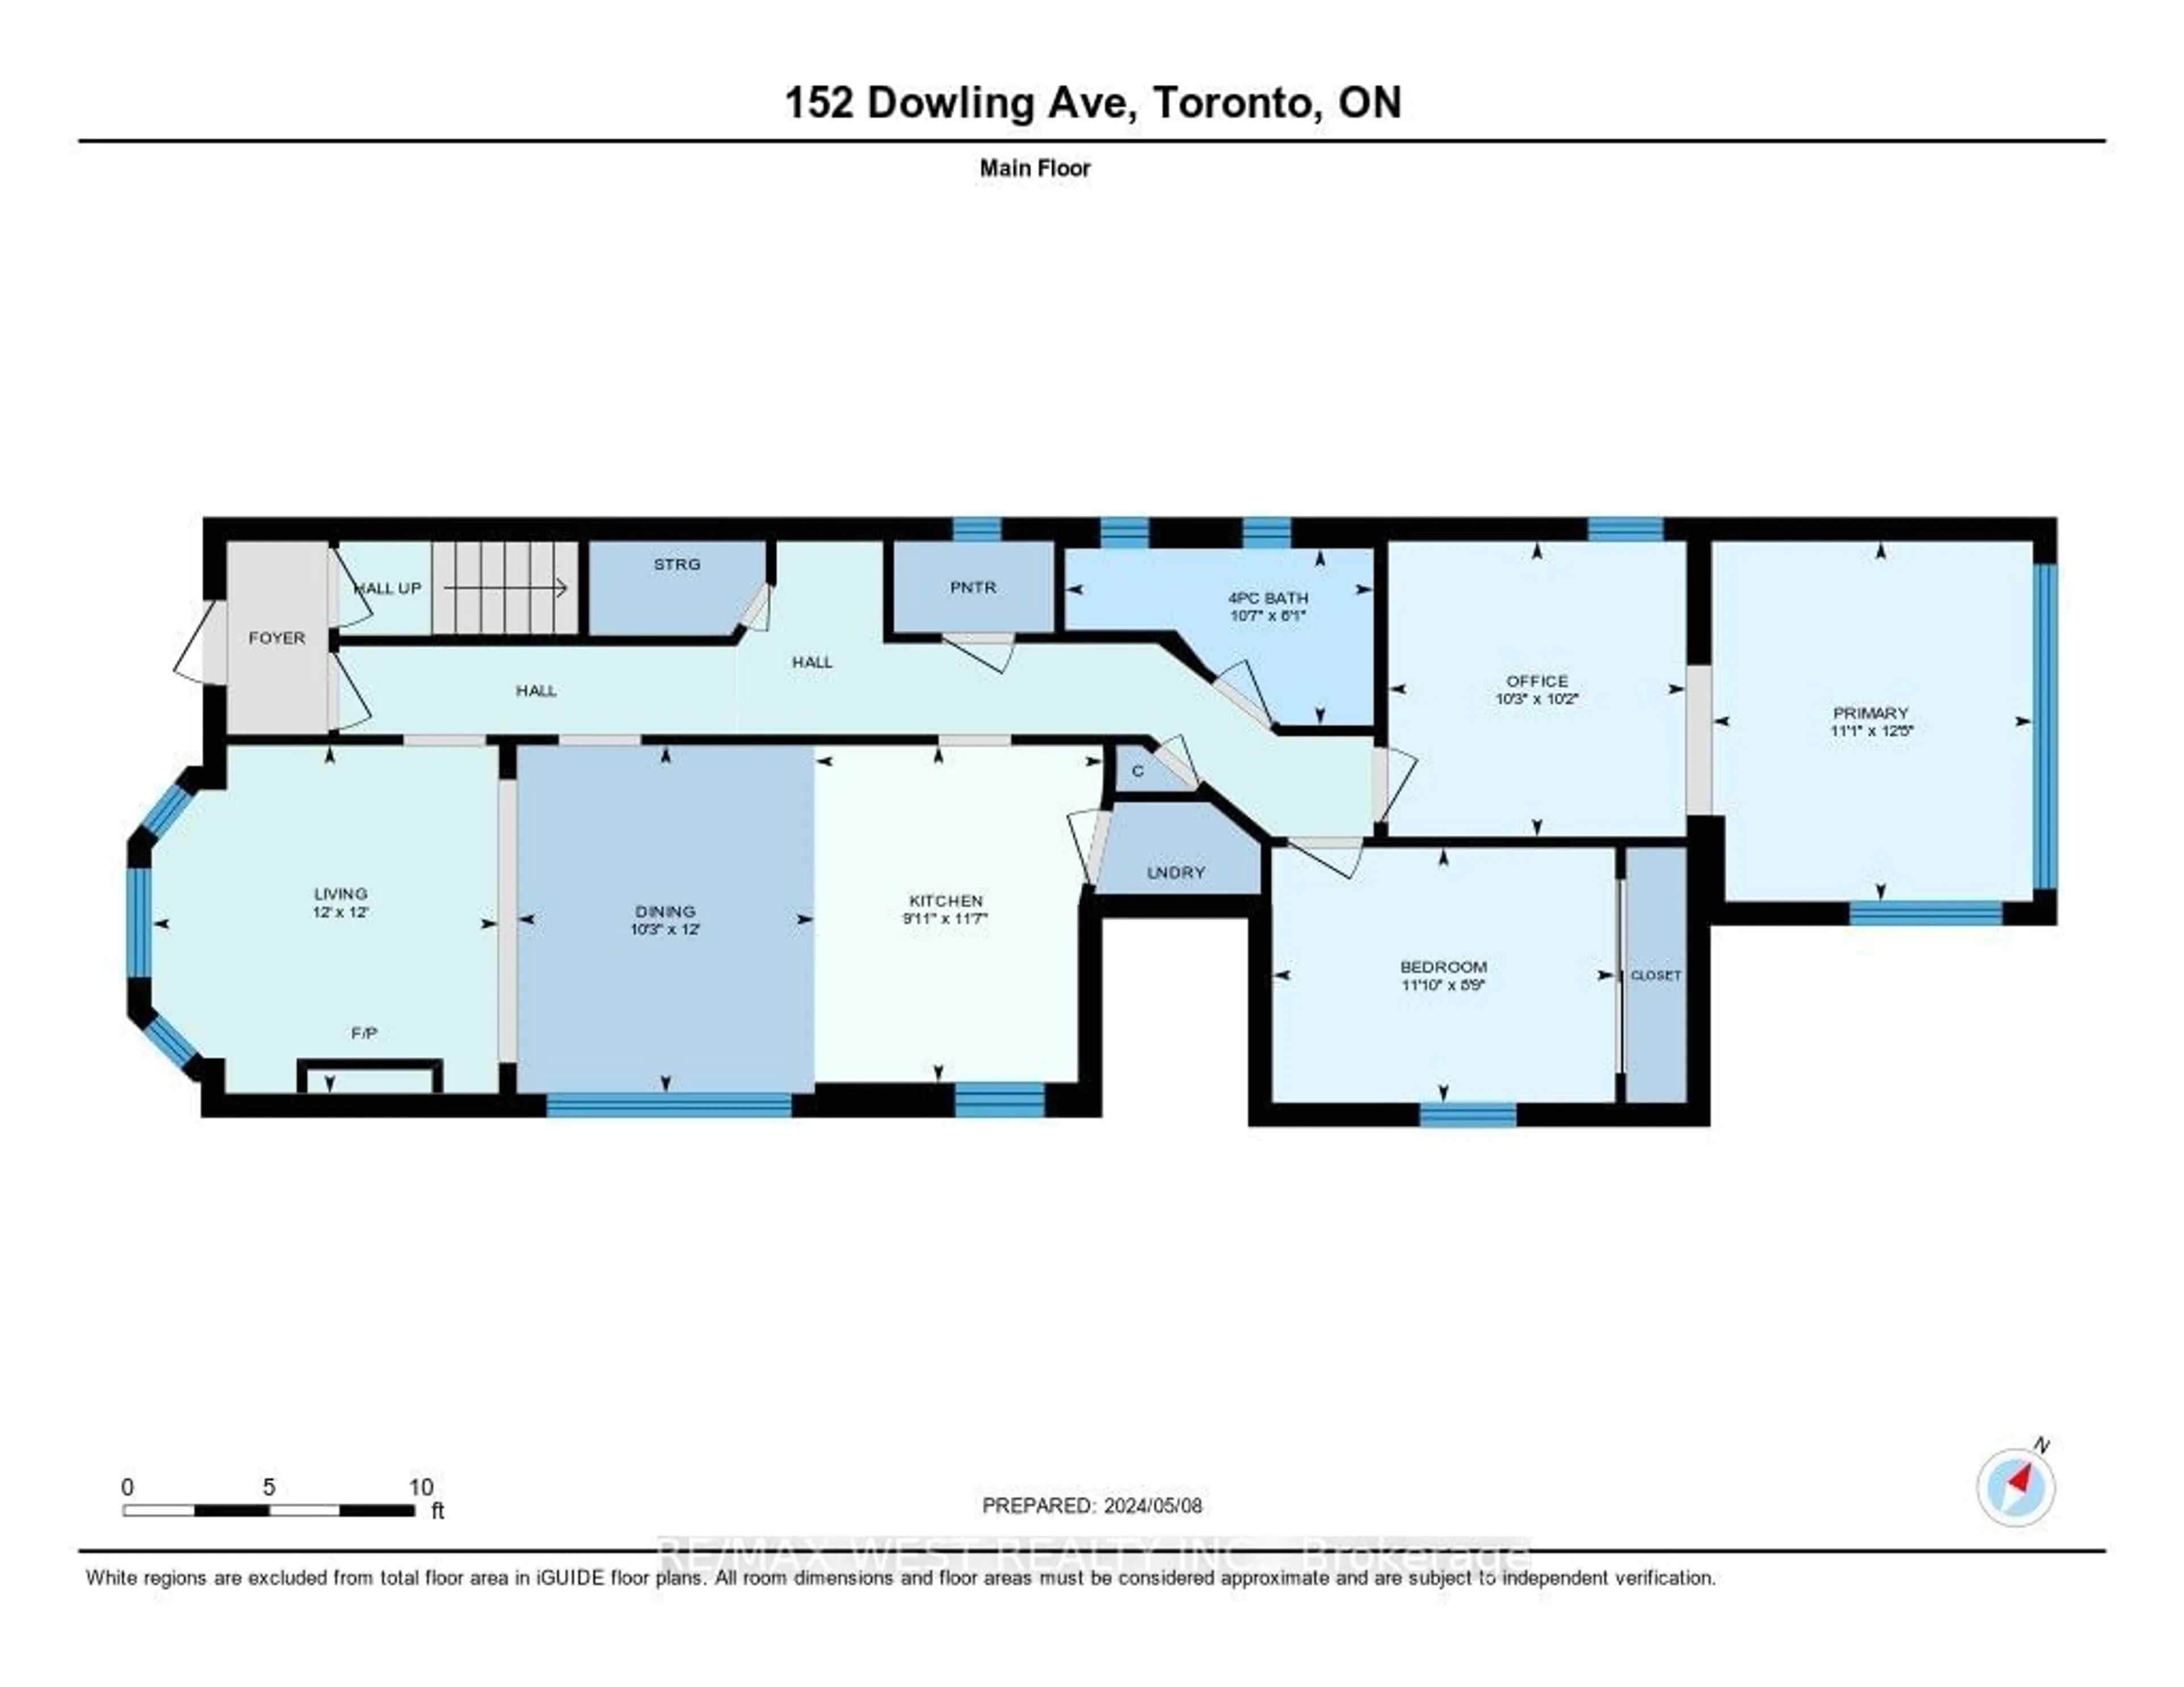 Floor plan for 152 Dowling Ave, Toronto Ontario M6K 3A6